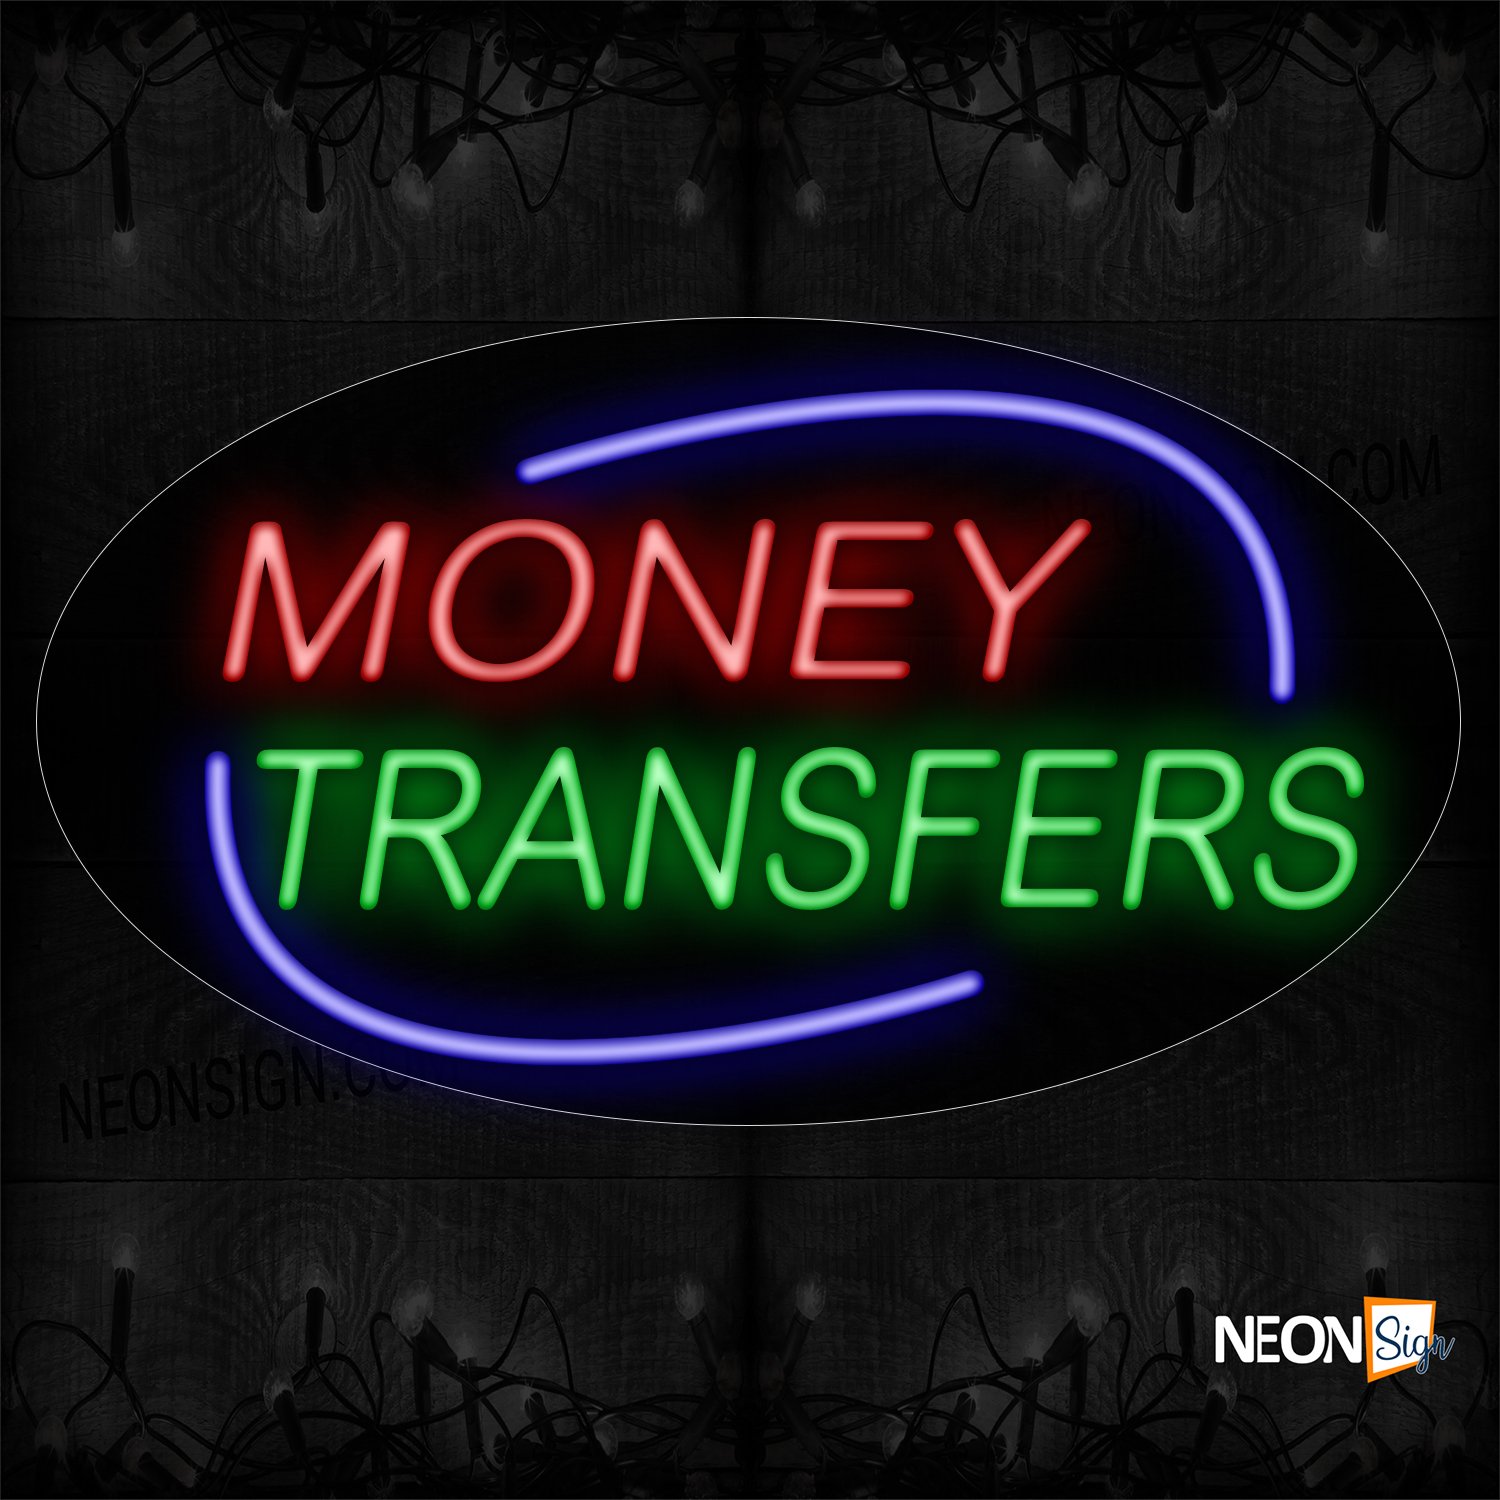 Image of 14600 Money Transfers With Blue Arc Border Neon Sign_17x30 Contoured Black Backing